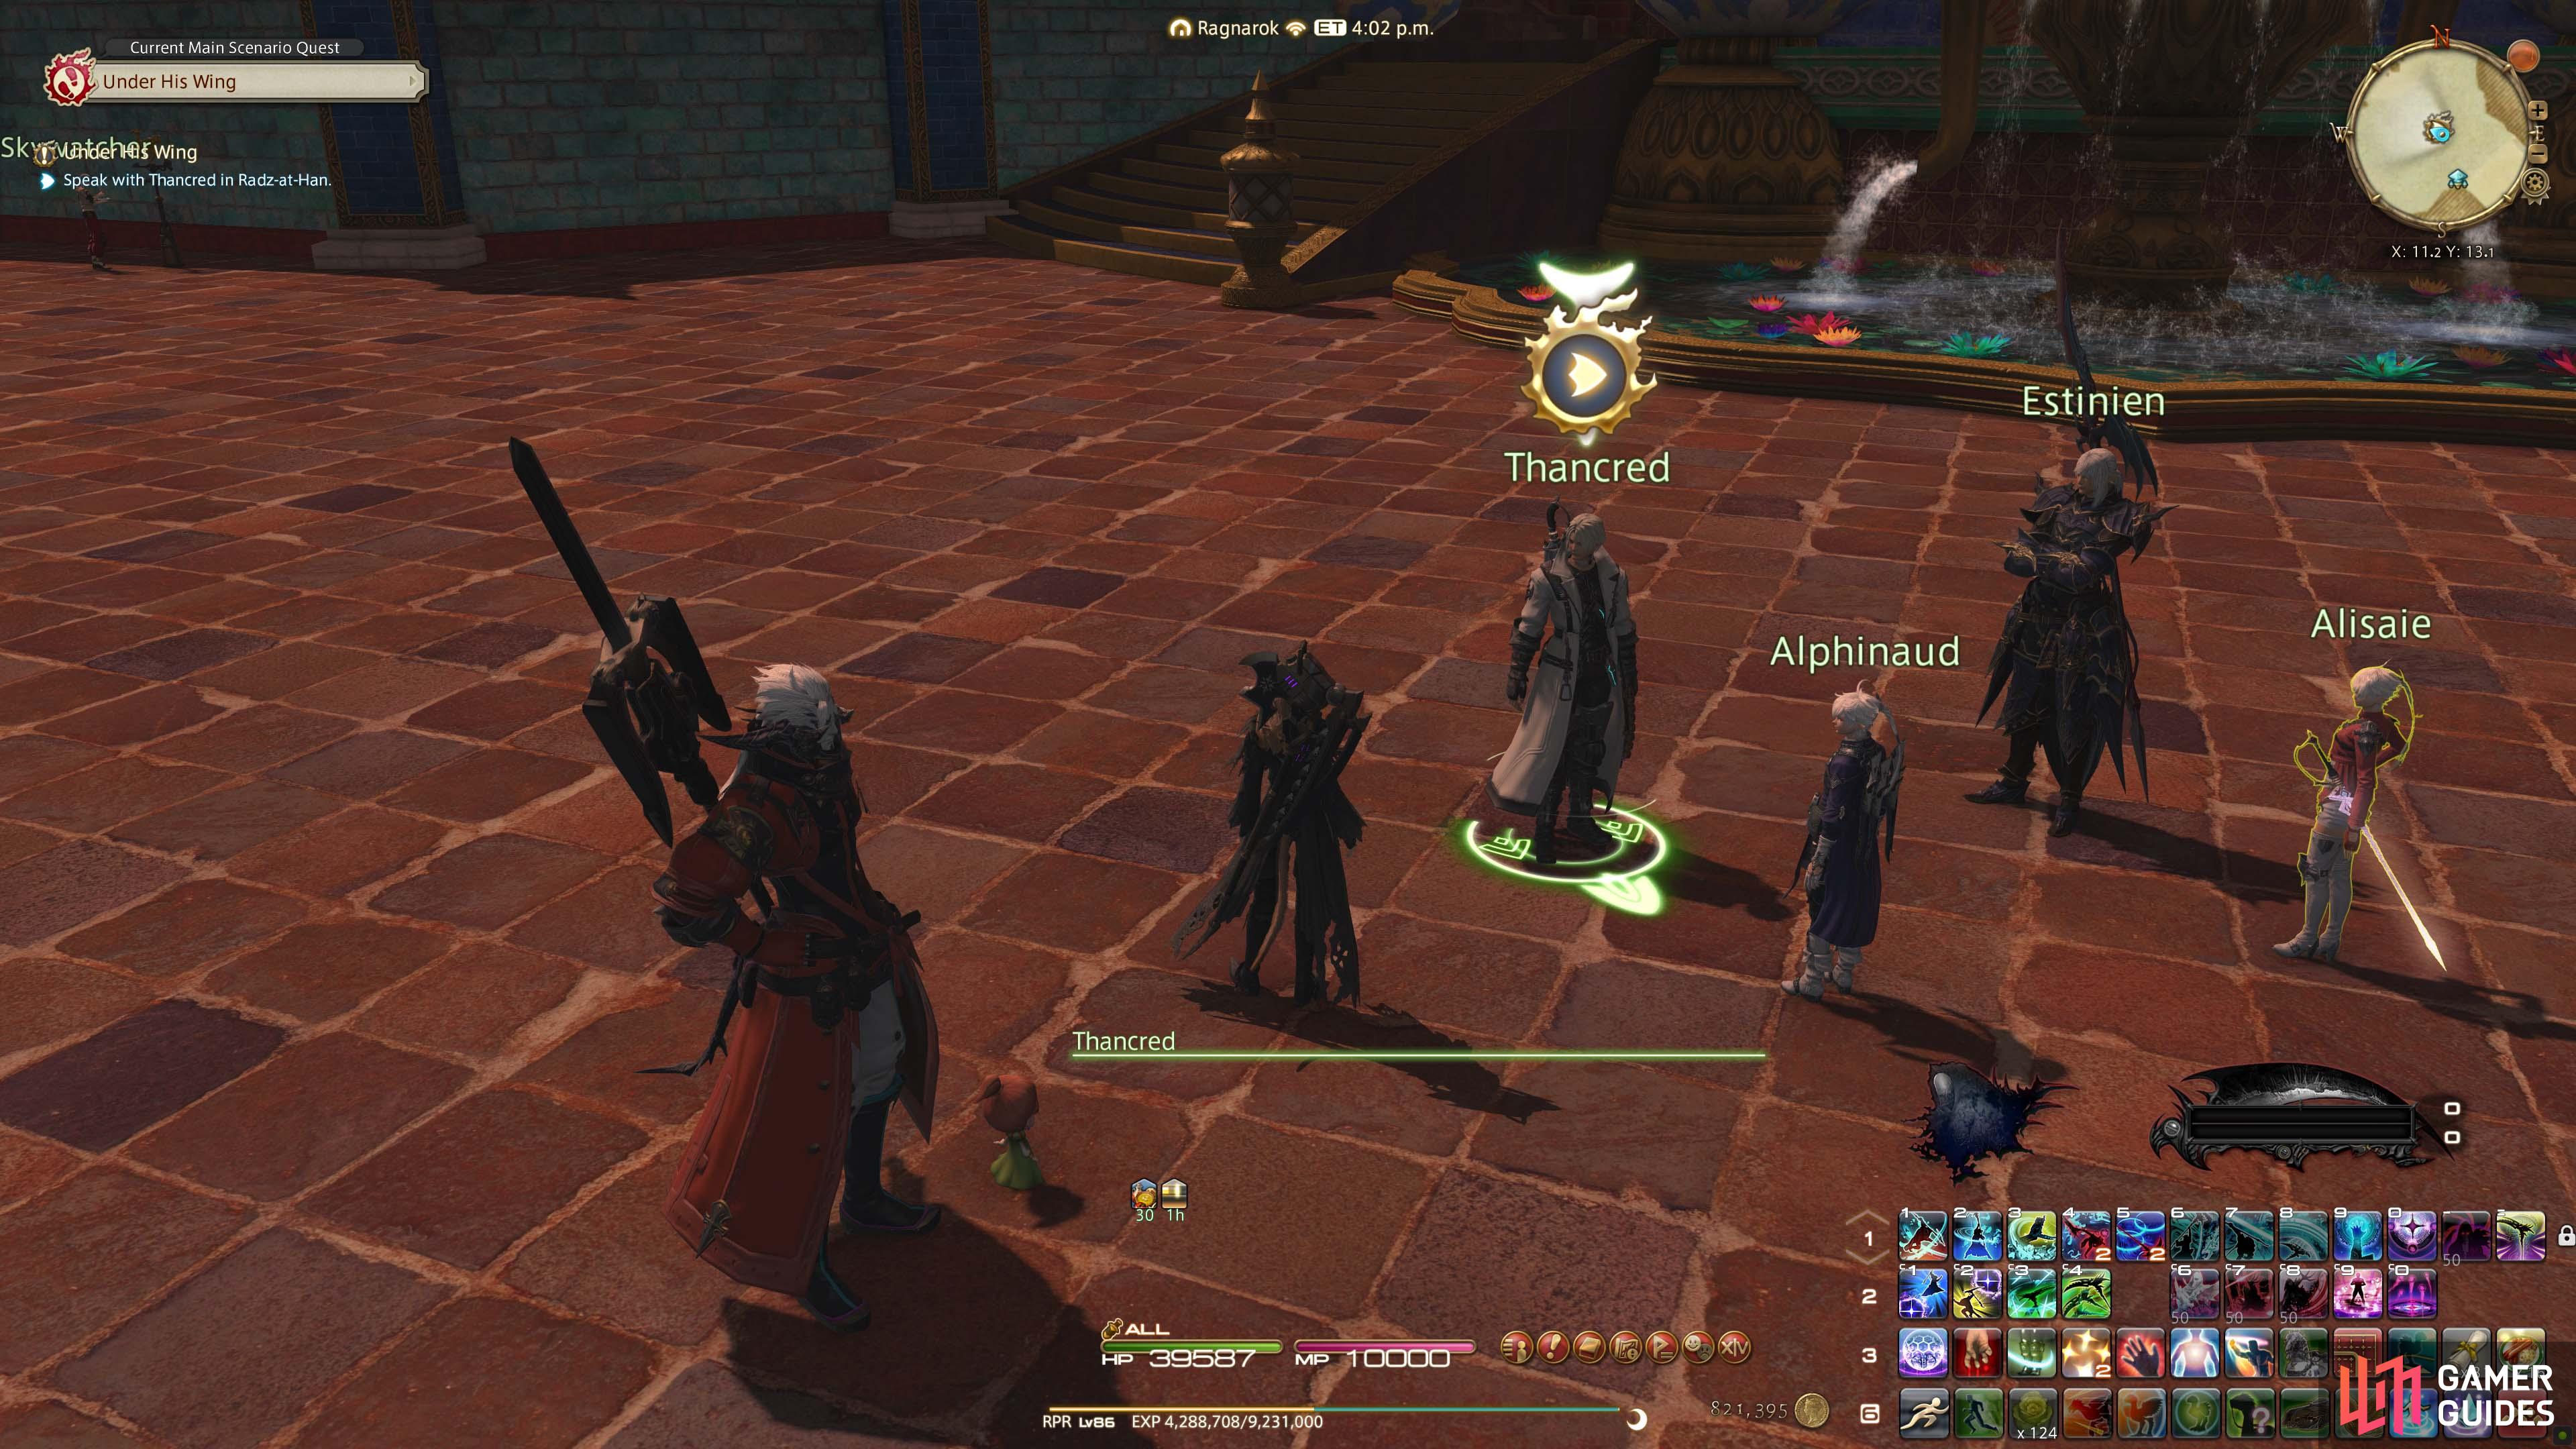 Thancred Location.